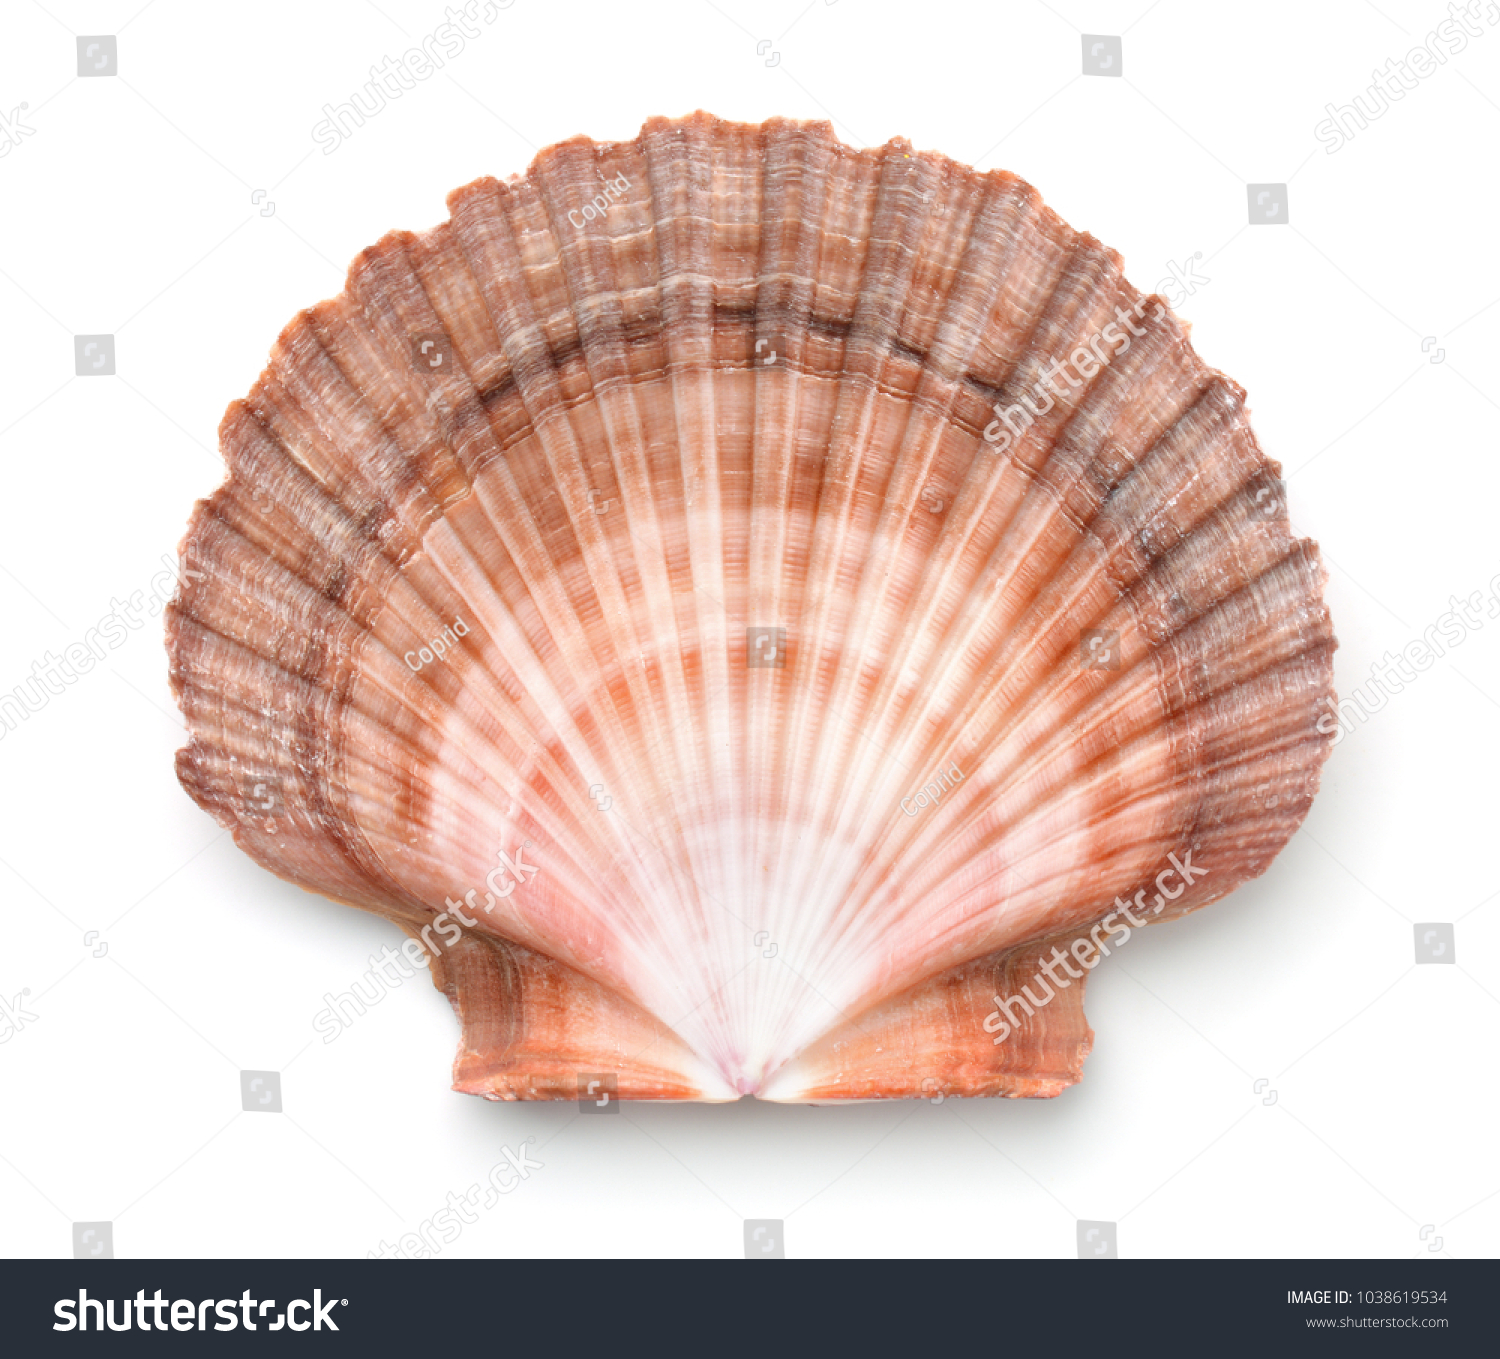 Top view of scallops shell isolated on white #1038619534